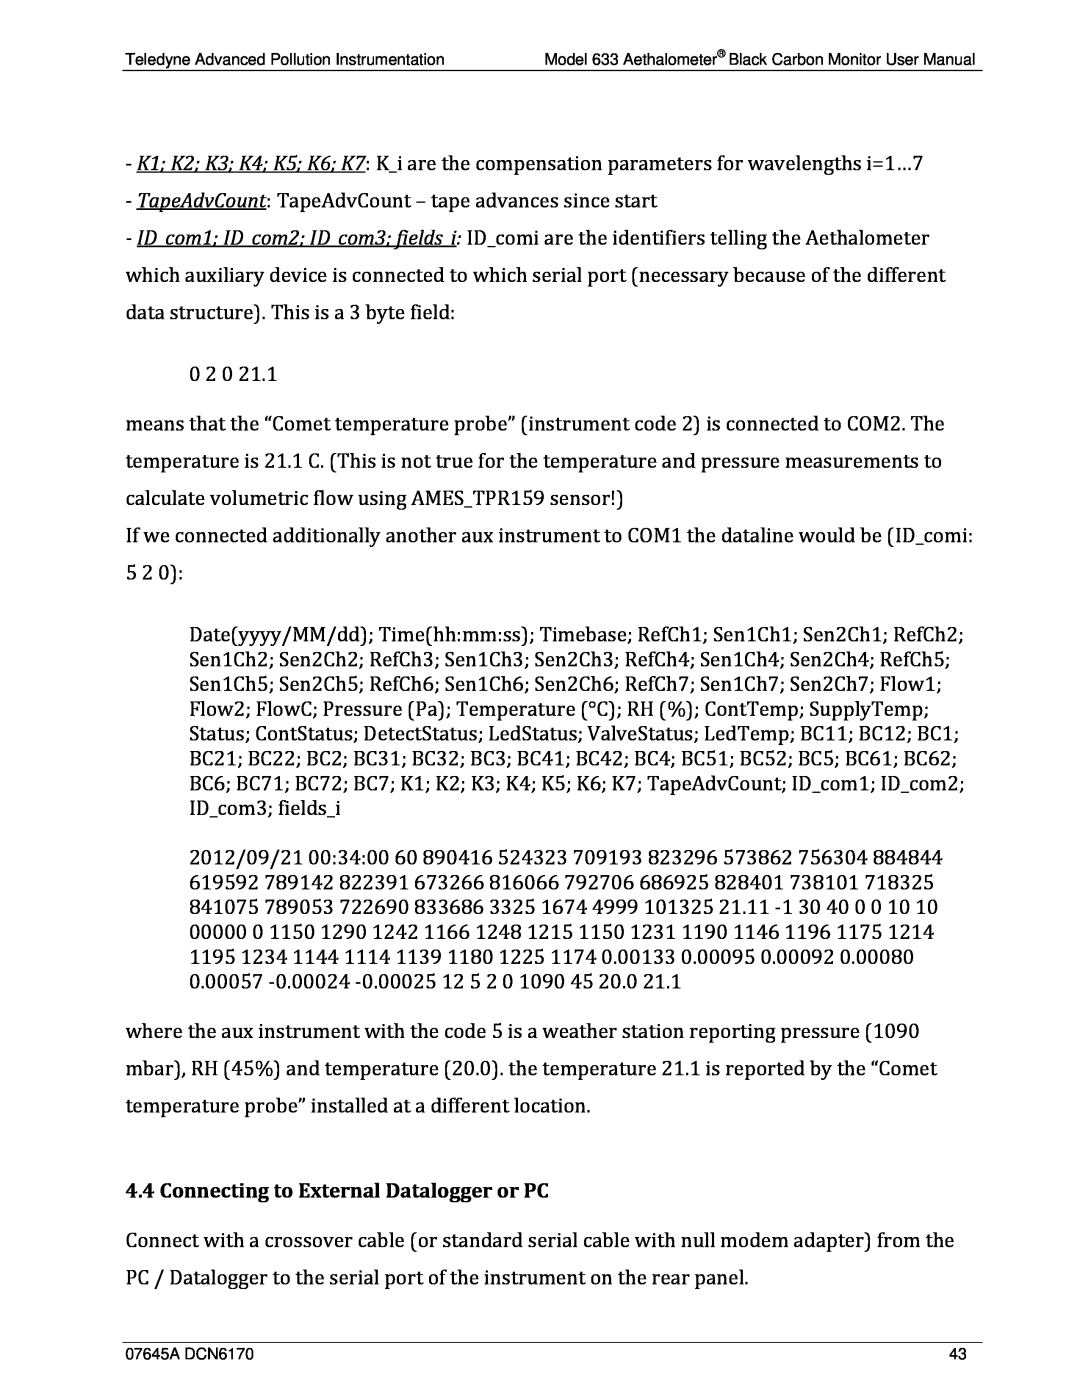 Teledyne 633 user manual Connecting to External Datalogger or PC 